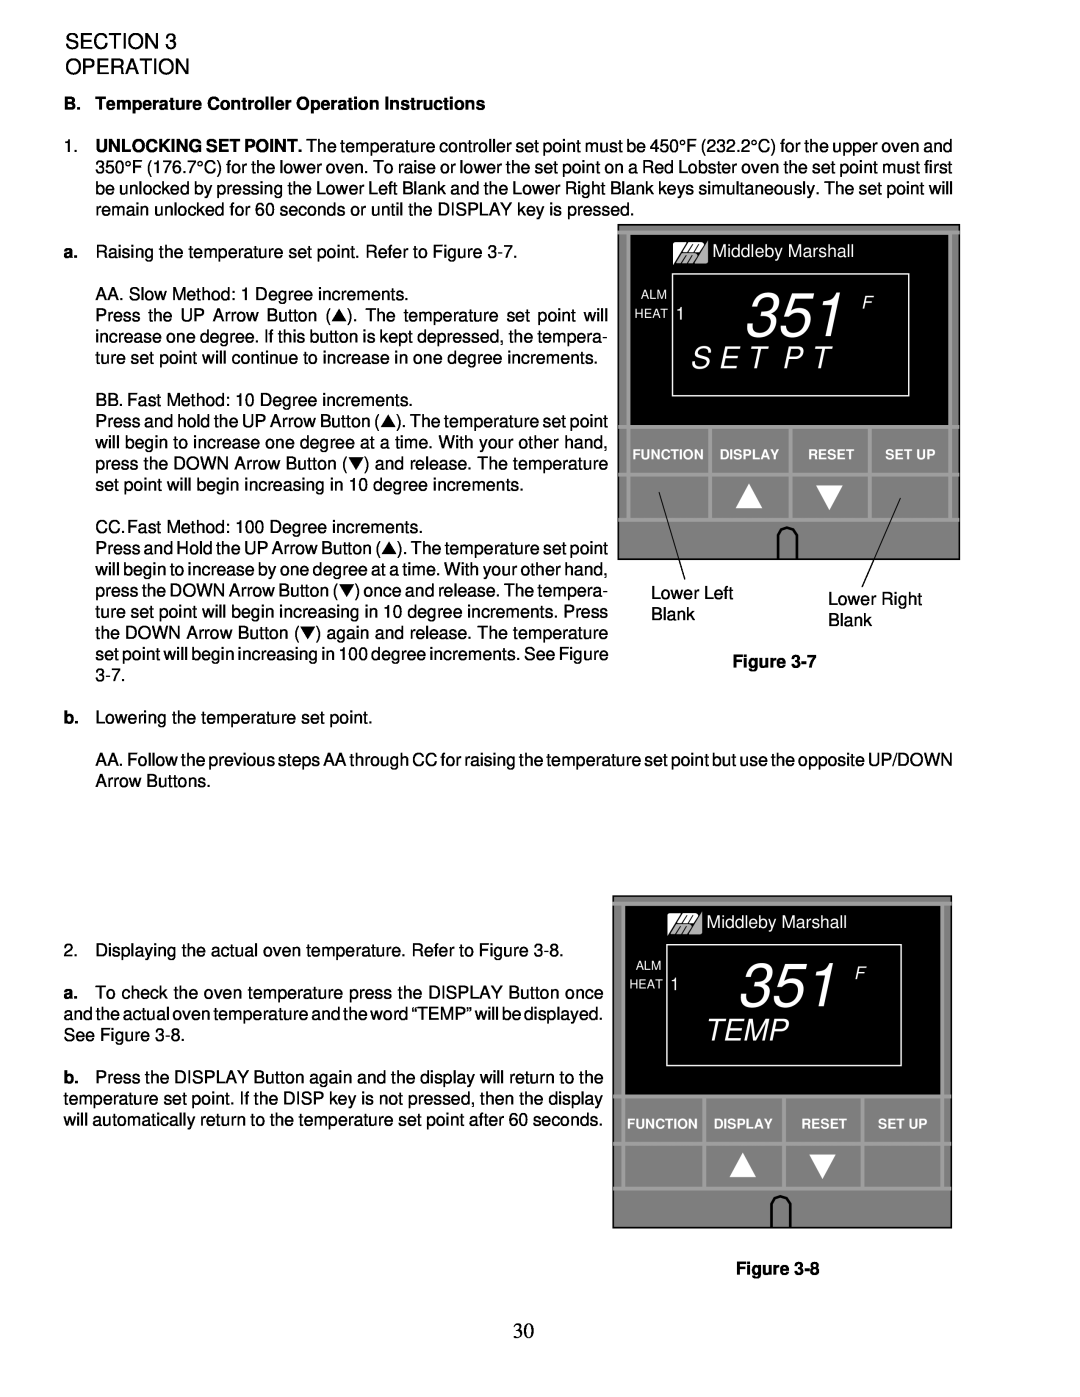 Middleby Marshall PS200-R68 351 F, S E T P T, Section Operation, B. Temperature Controller Operation Instructions 